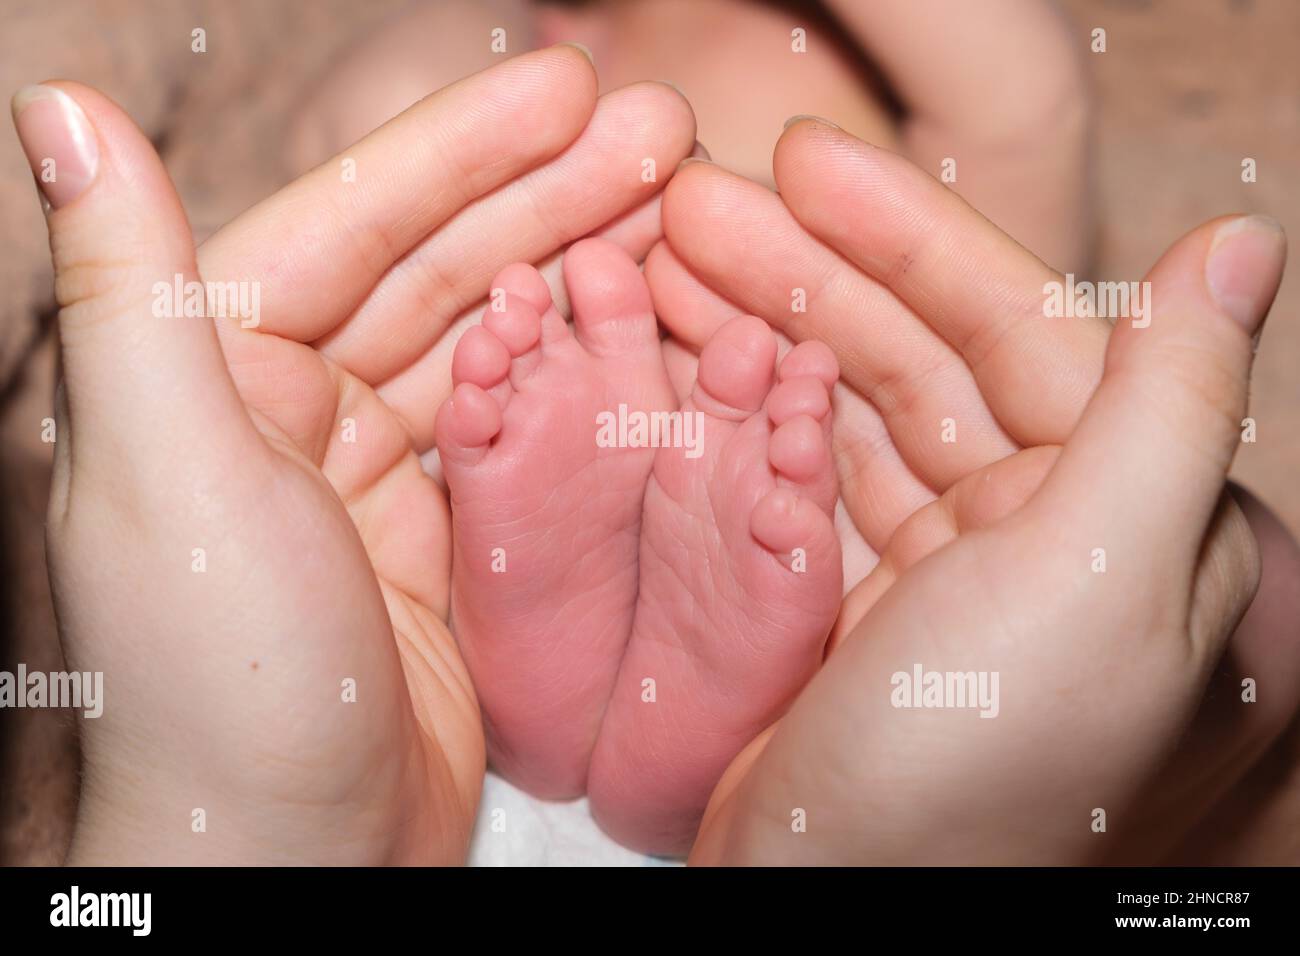 Newborn Baby Feets In Parent Hands At Home Stock Photo, Picture and Royalty  Free Image. Image 120649148.